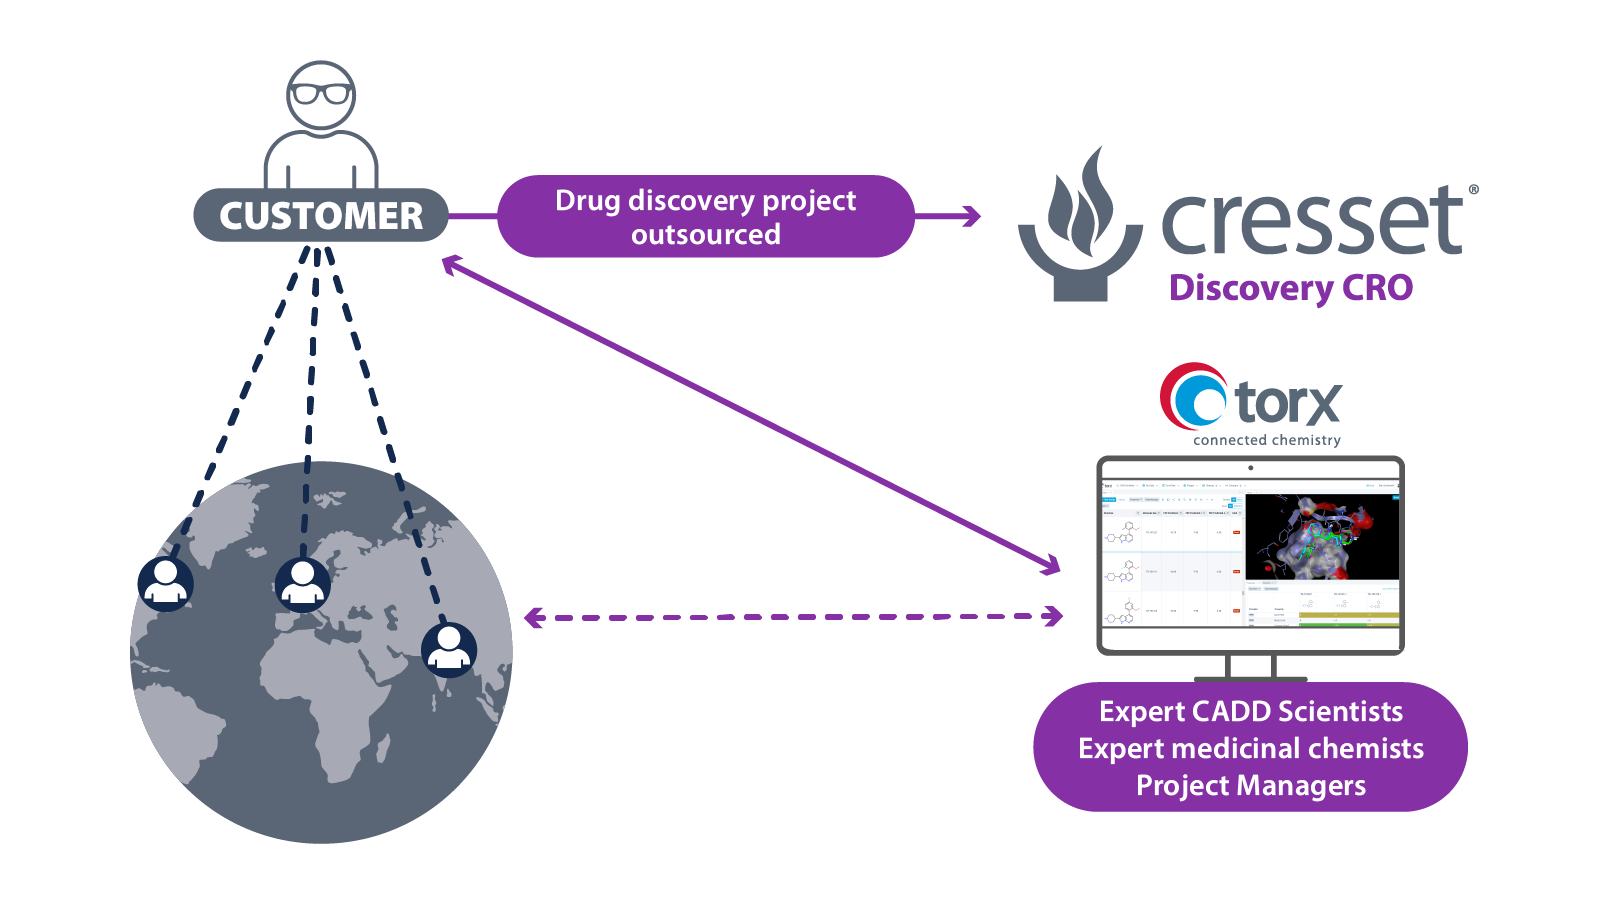 Figure 1. Possible interaction routes between Cresset Discovery, our customer, and other stakeholders in a drug discovery project using Torx